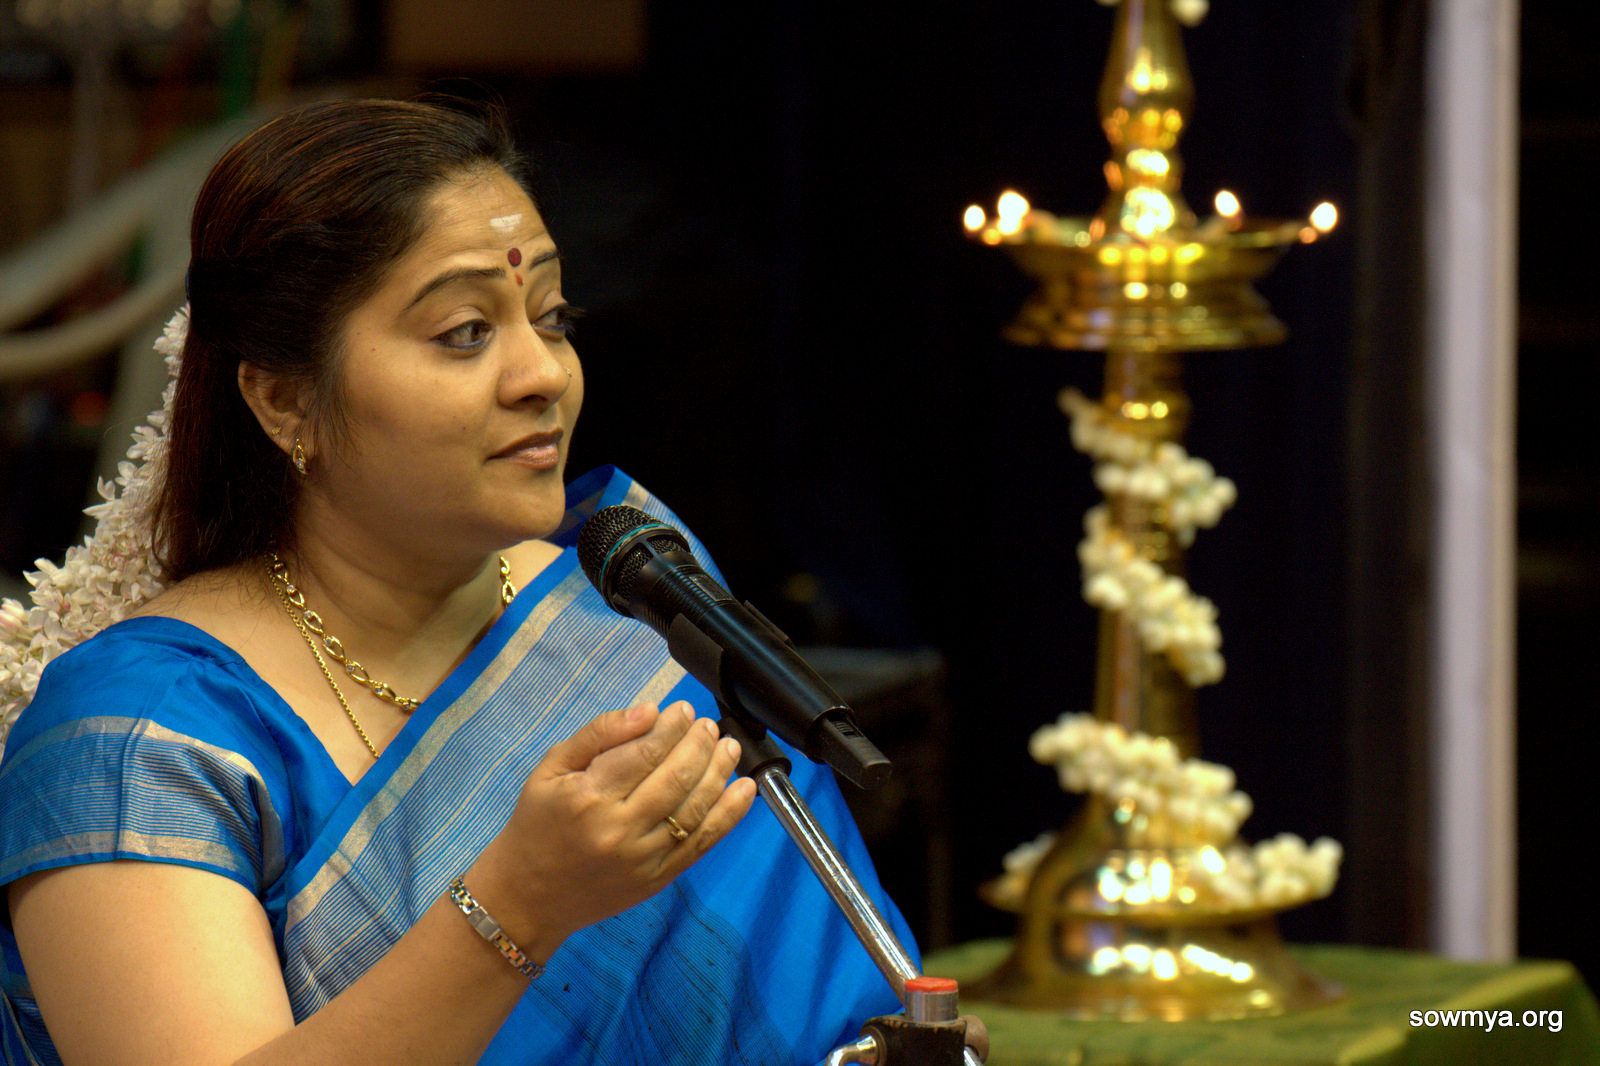 Carnatic music, The Federal, English news website, Sowmya, The Music Academy